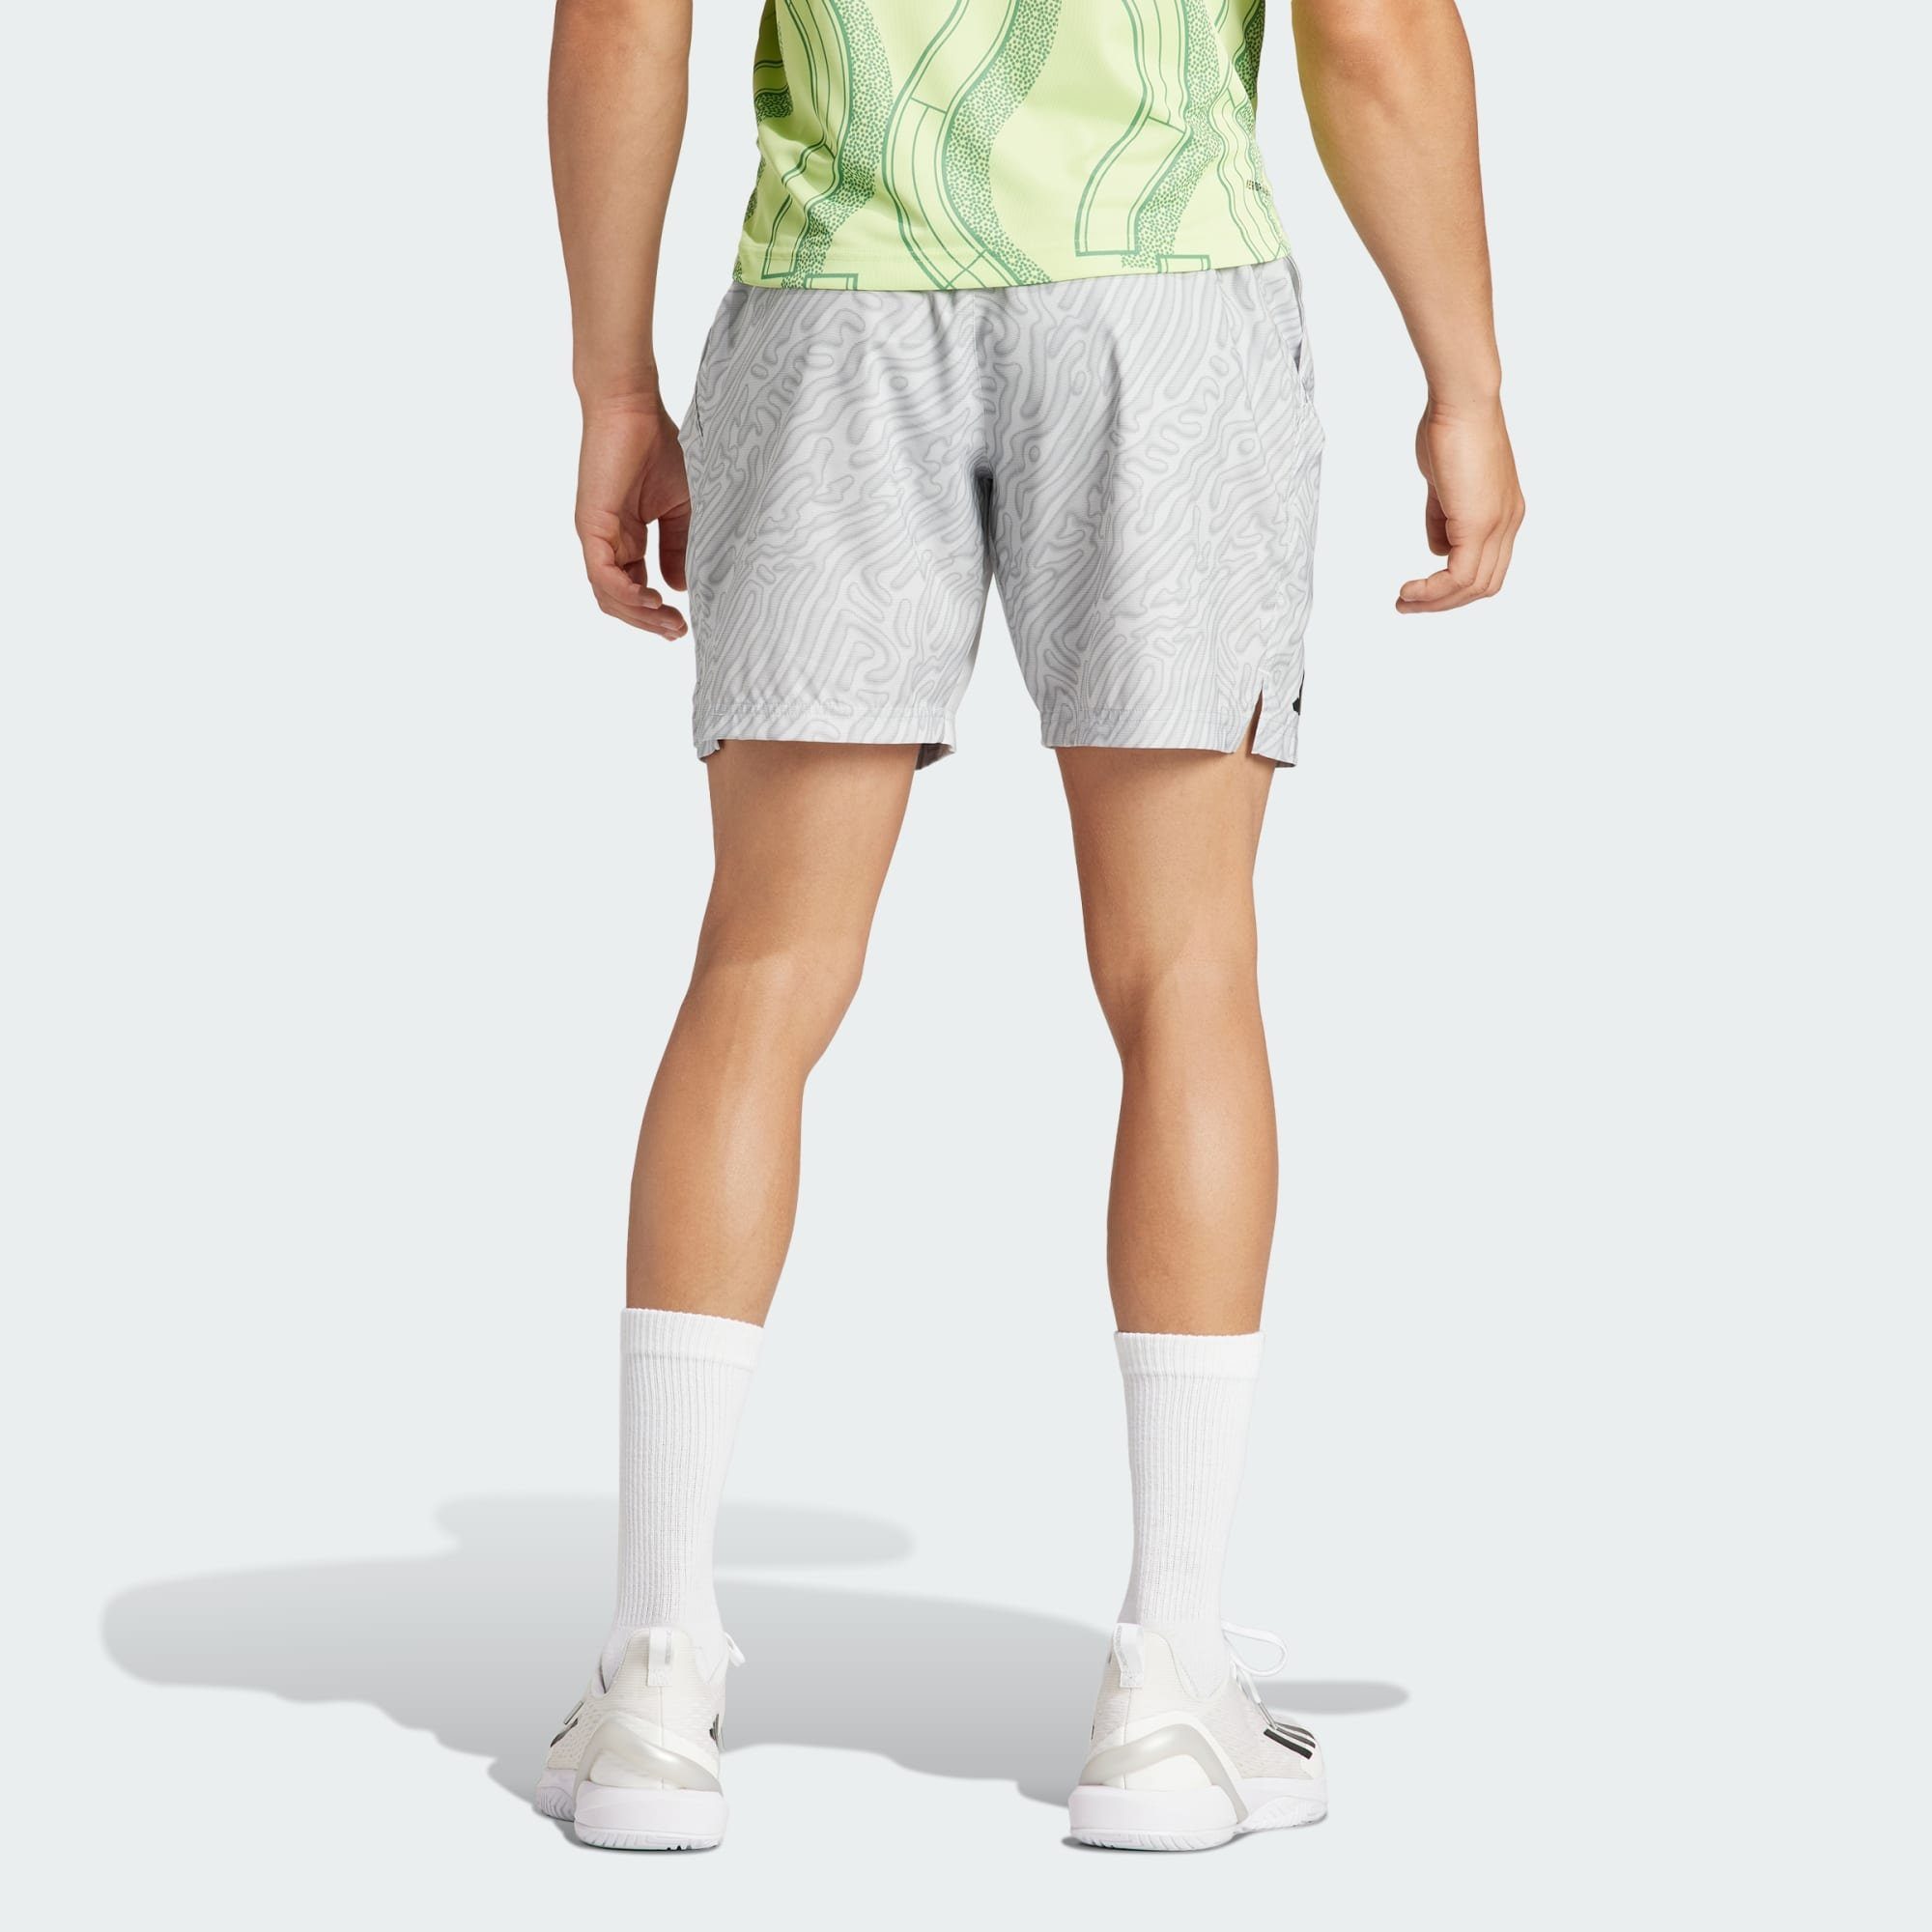 PRO HEAT.RDY One SHORTS Funktionsshorts adidas 7-INCH Grey ERGO TENNIS Solid / PRINTED Charcoal Performance Grey